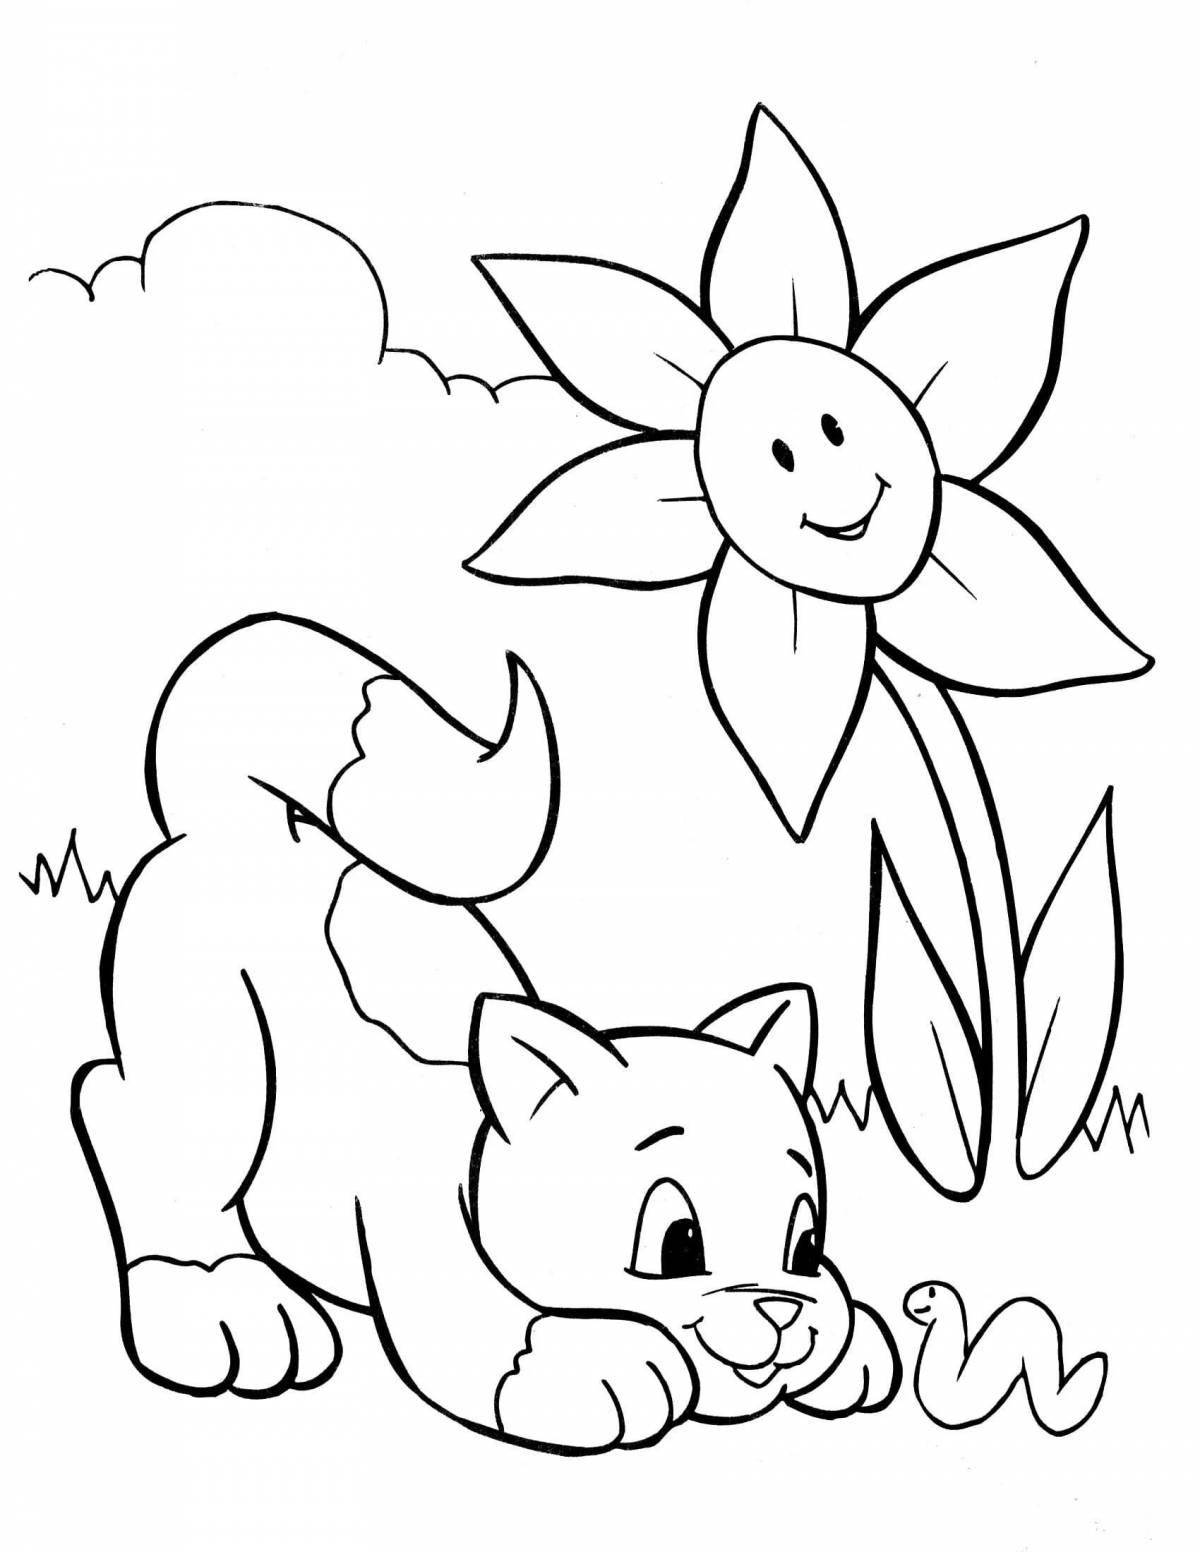 Colorful-amazing coloring page com